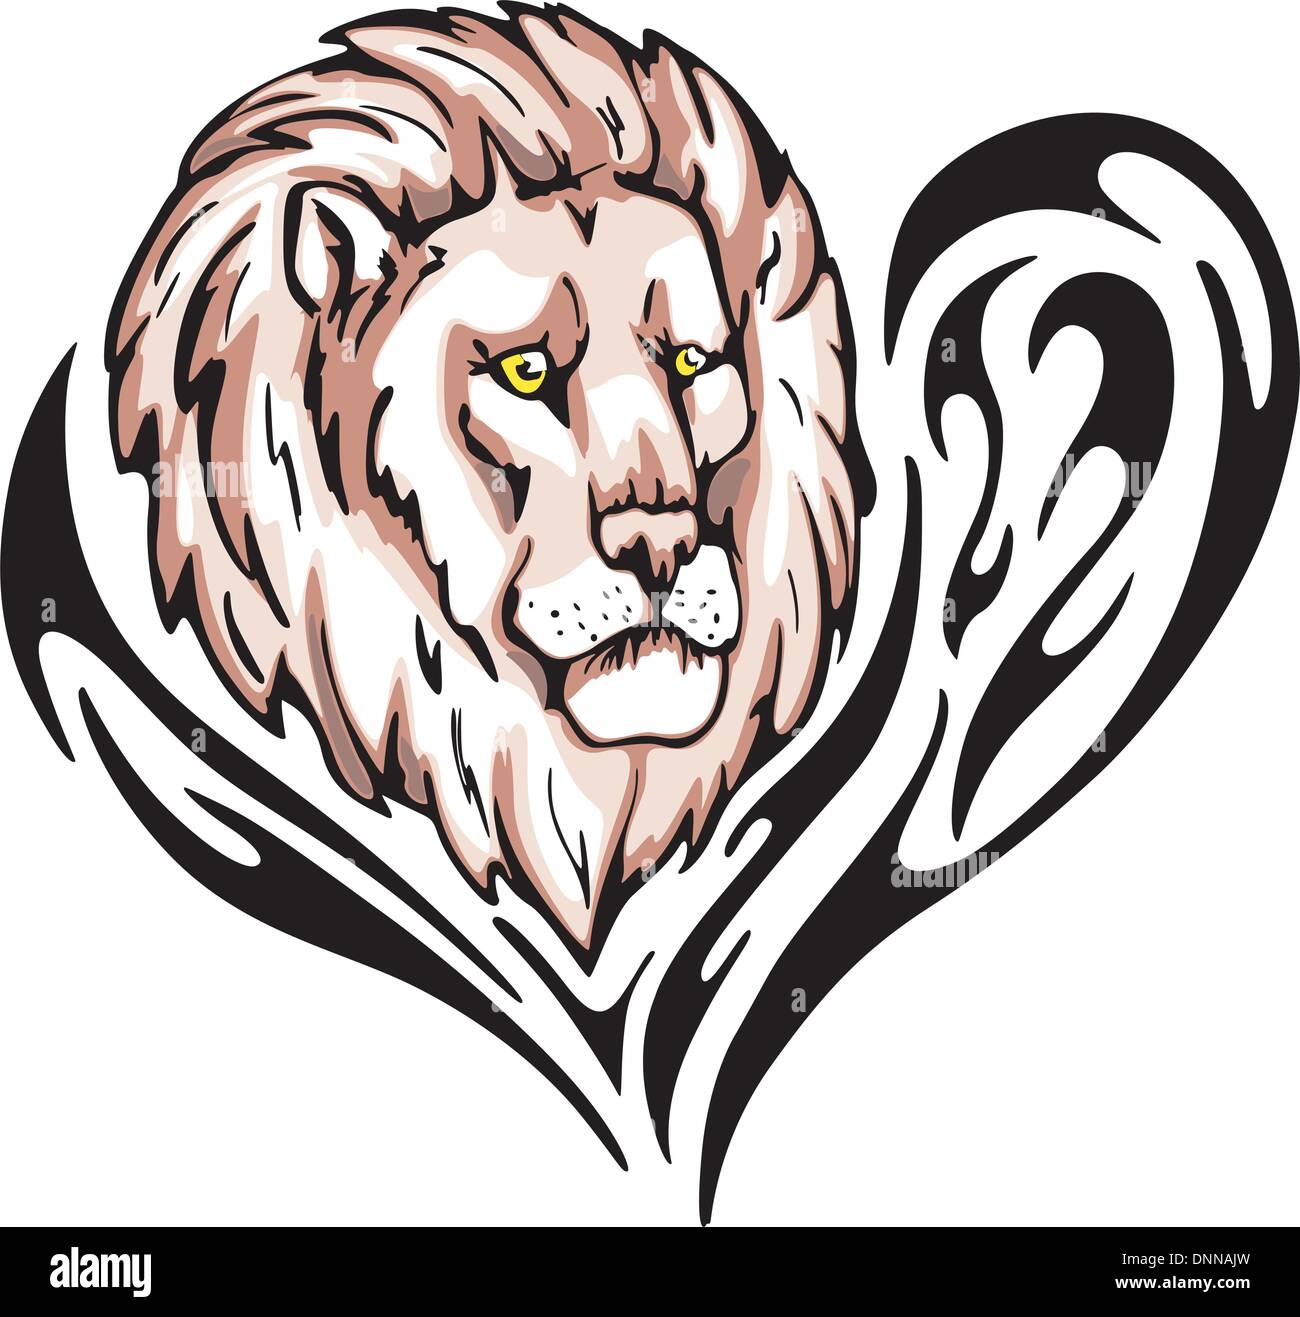 Snake Tattoo Png Transparent Images  Lion Head Drawing Png Transparent PNG   640x480  Free Download on NicePNG